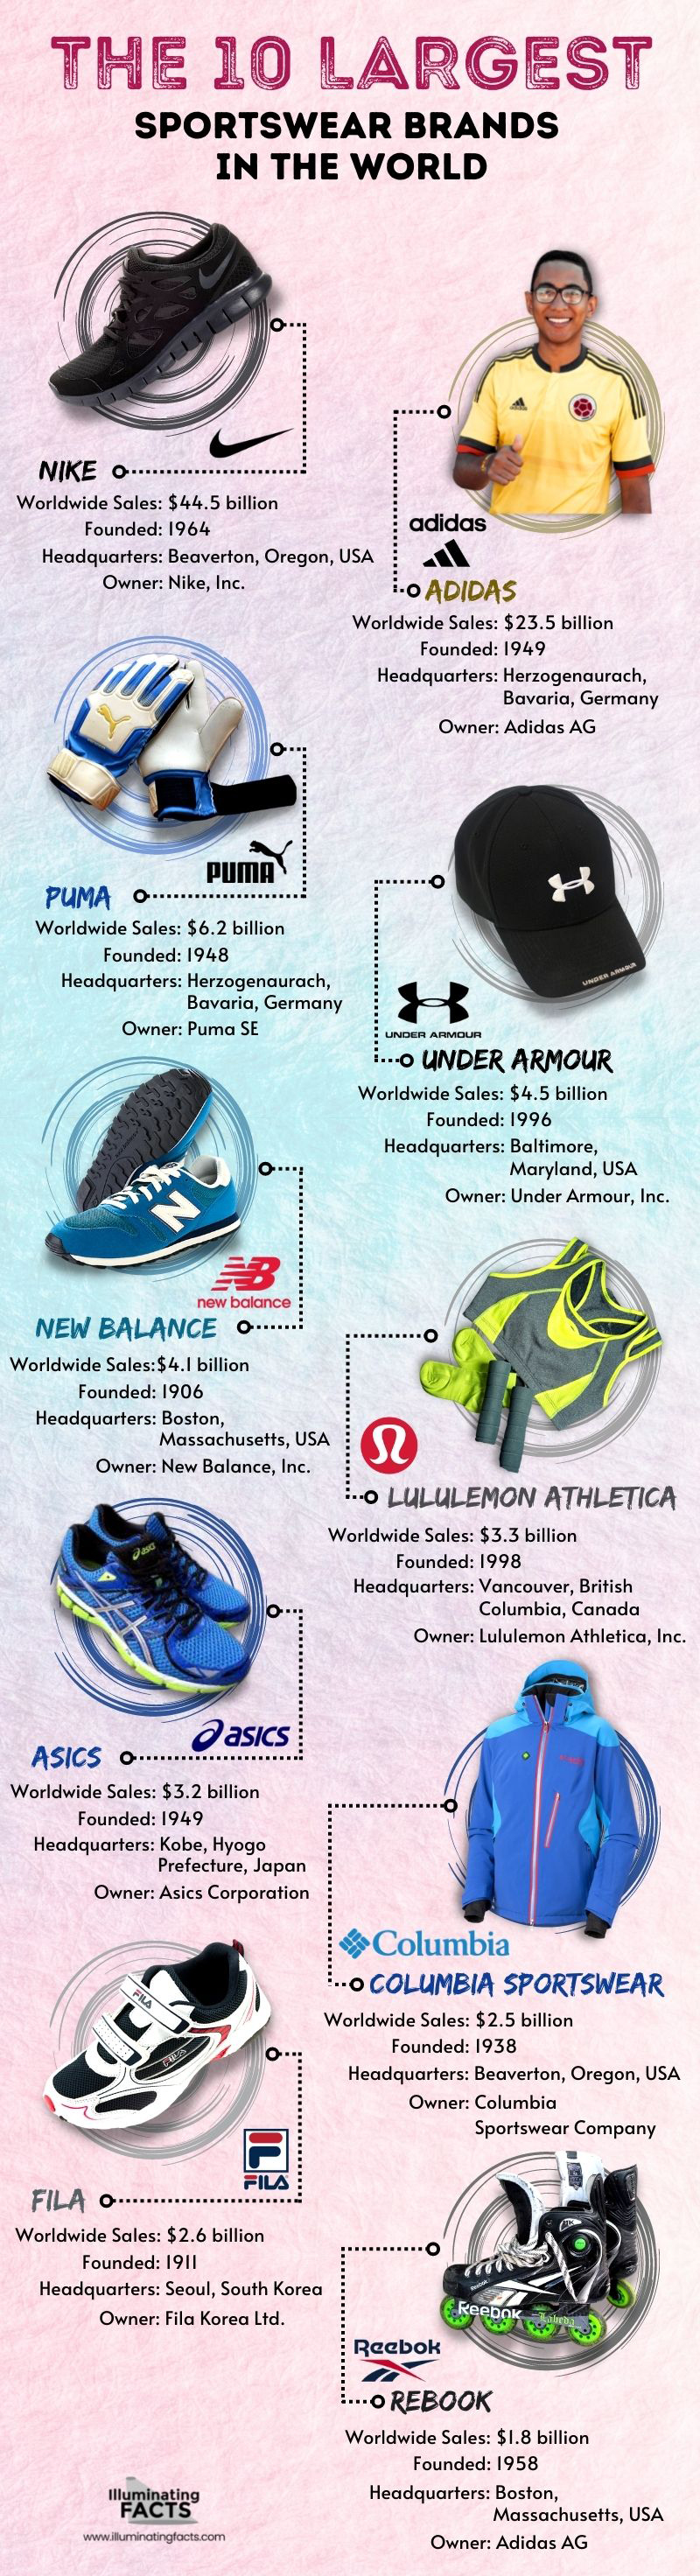 THE 10 LARGEST SPORTSWEAR BRANDS IN THE WORLD